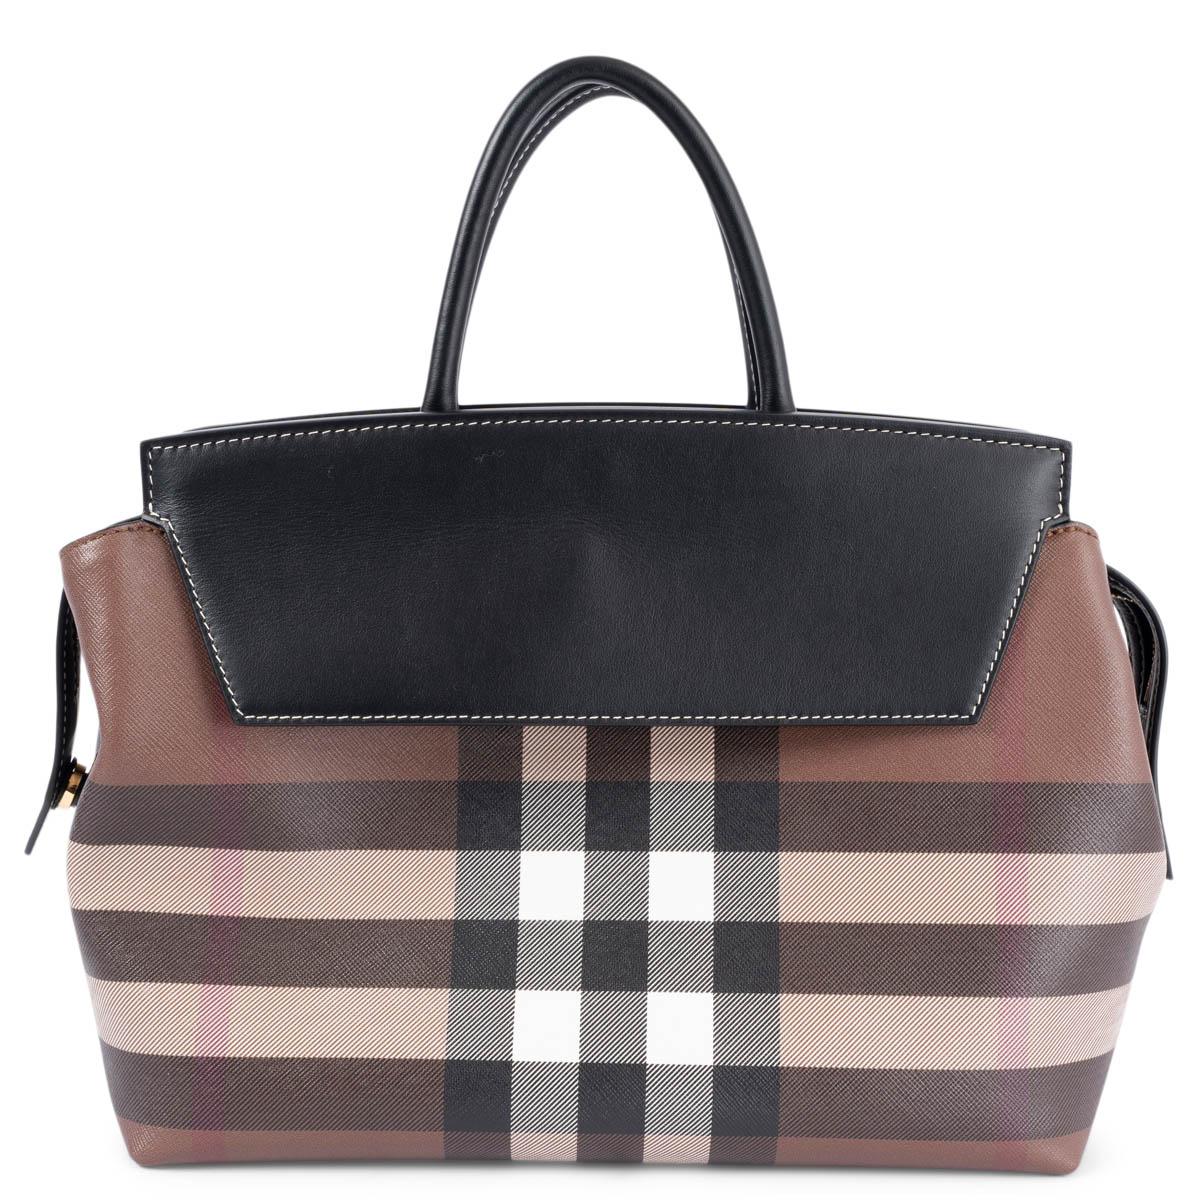 BURBERRY Birch brown check & leather MEDIUM CATHERINE Shoulder Bag In Excellent Condition For Sale In Zürich, CH